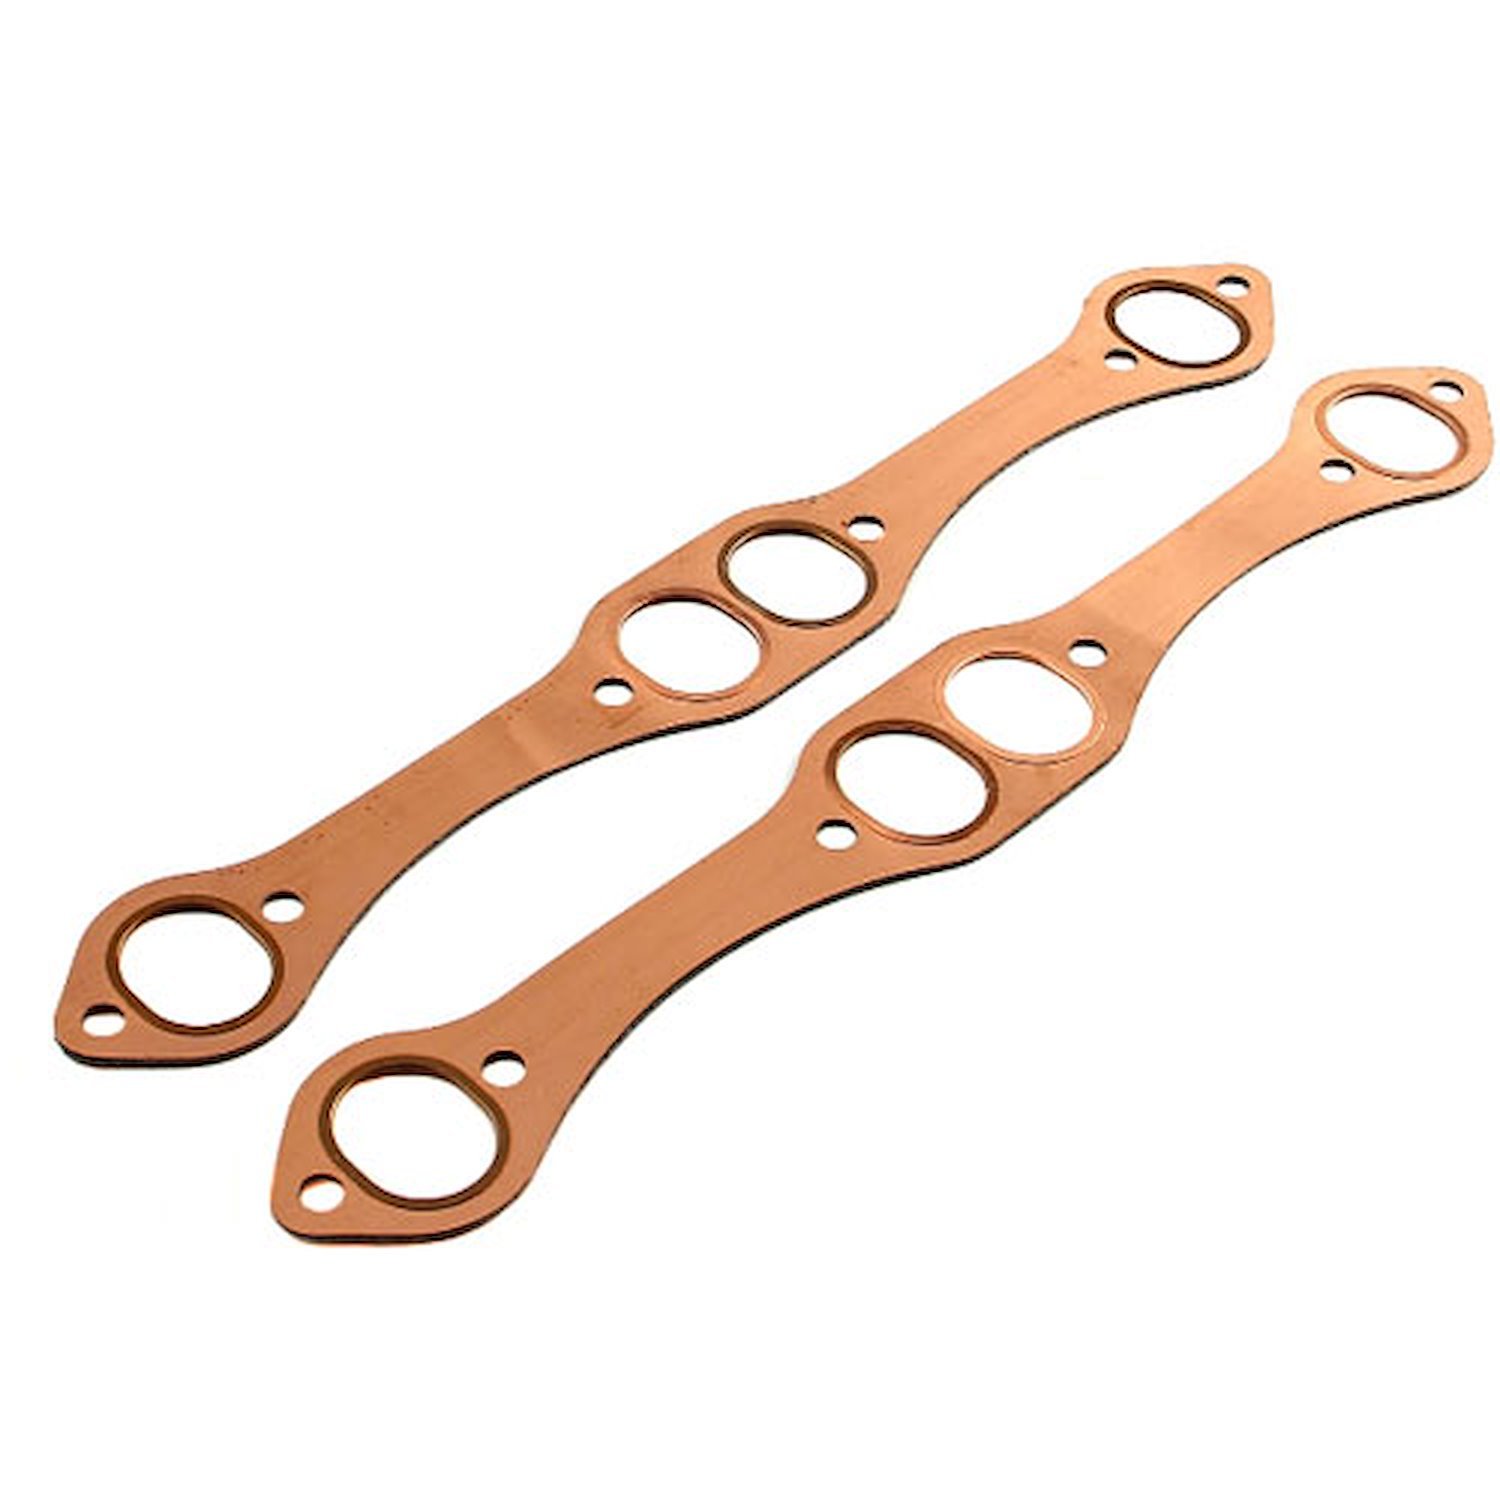 Chevy SBC 350 Oval Port Copper Exhaust Gasket Set